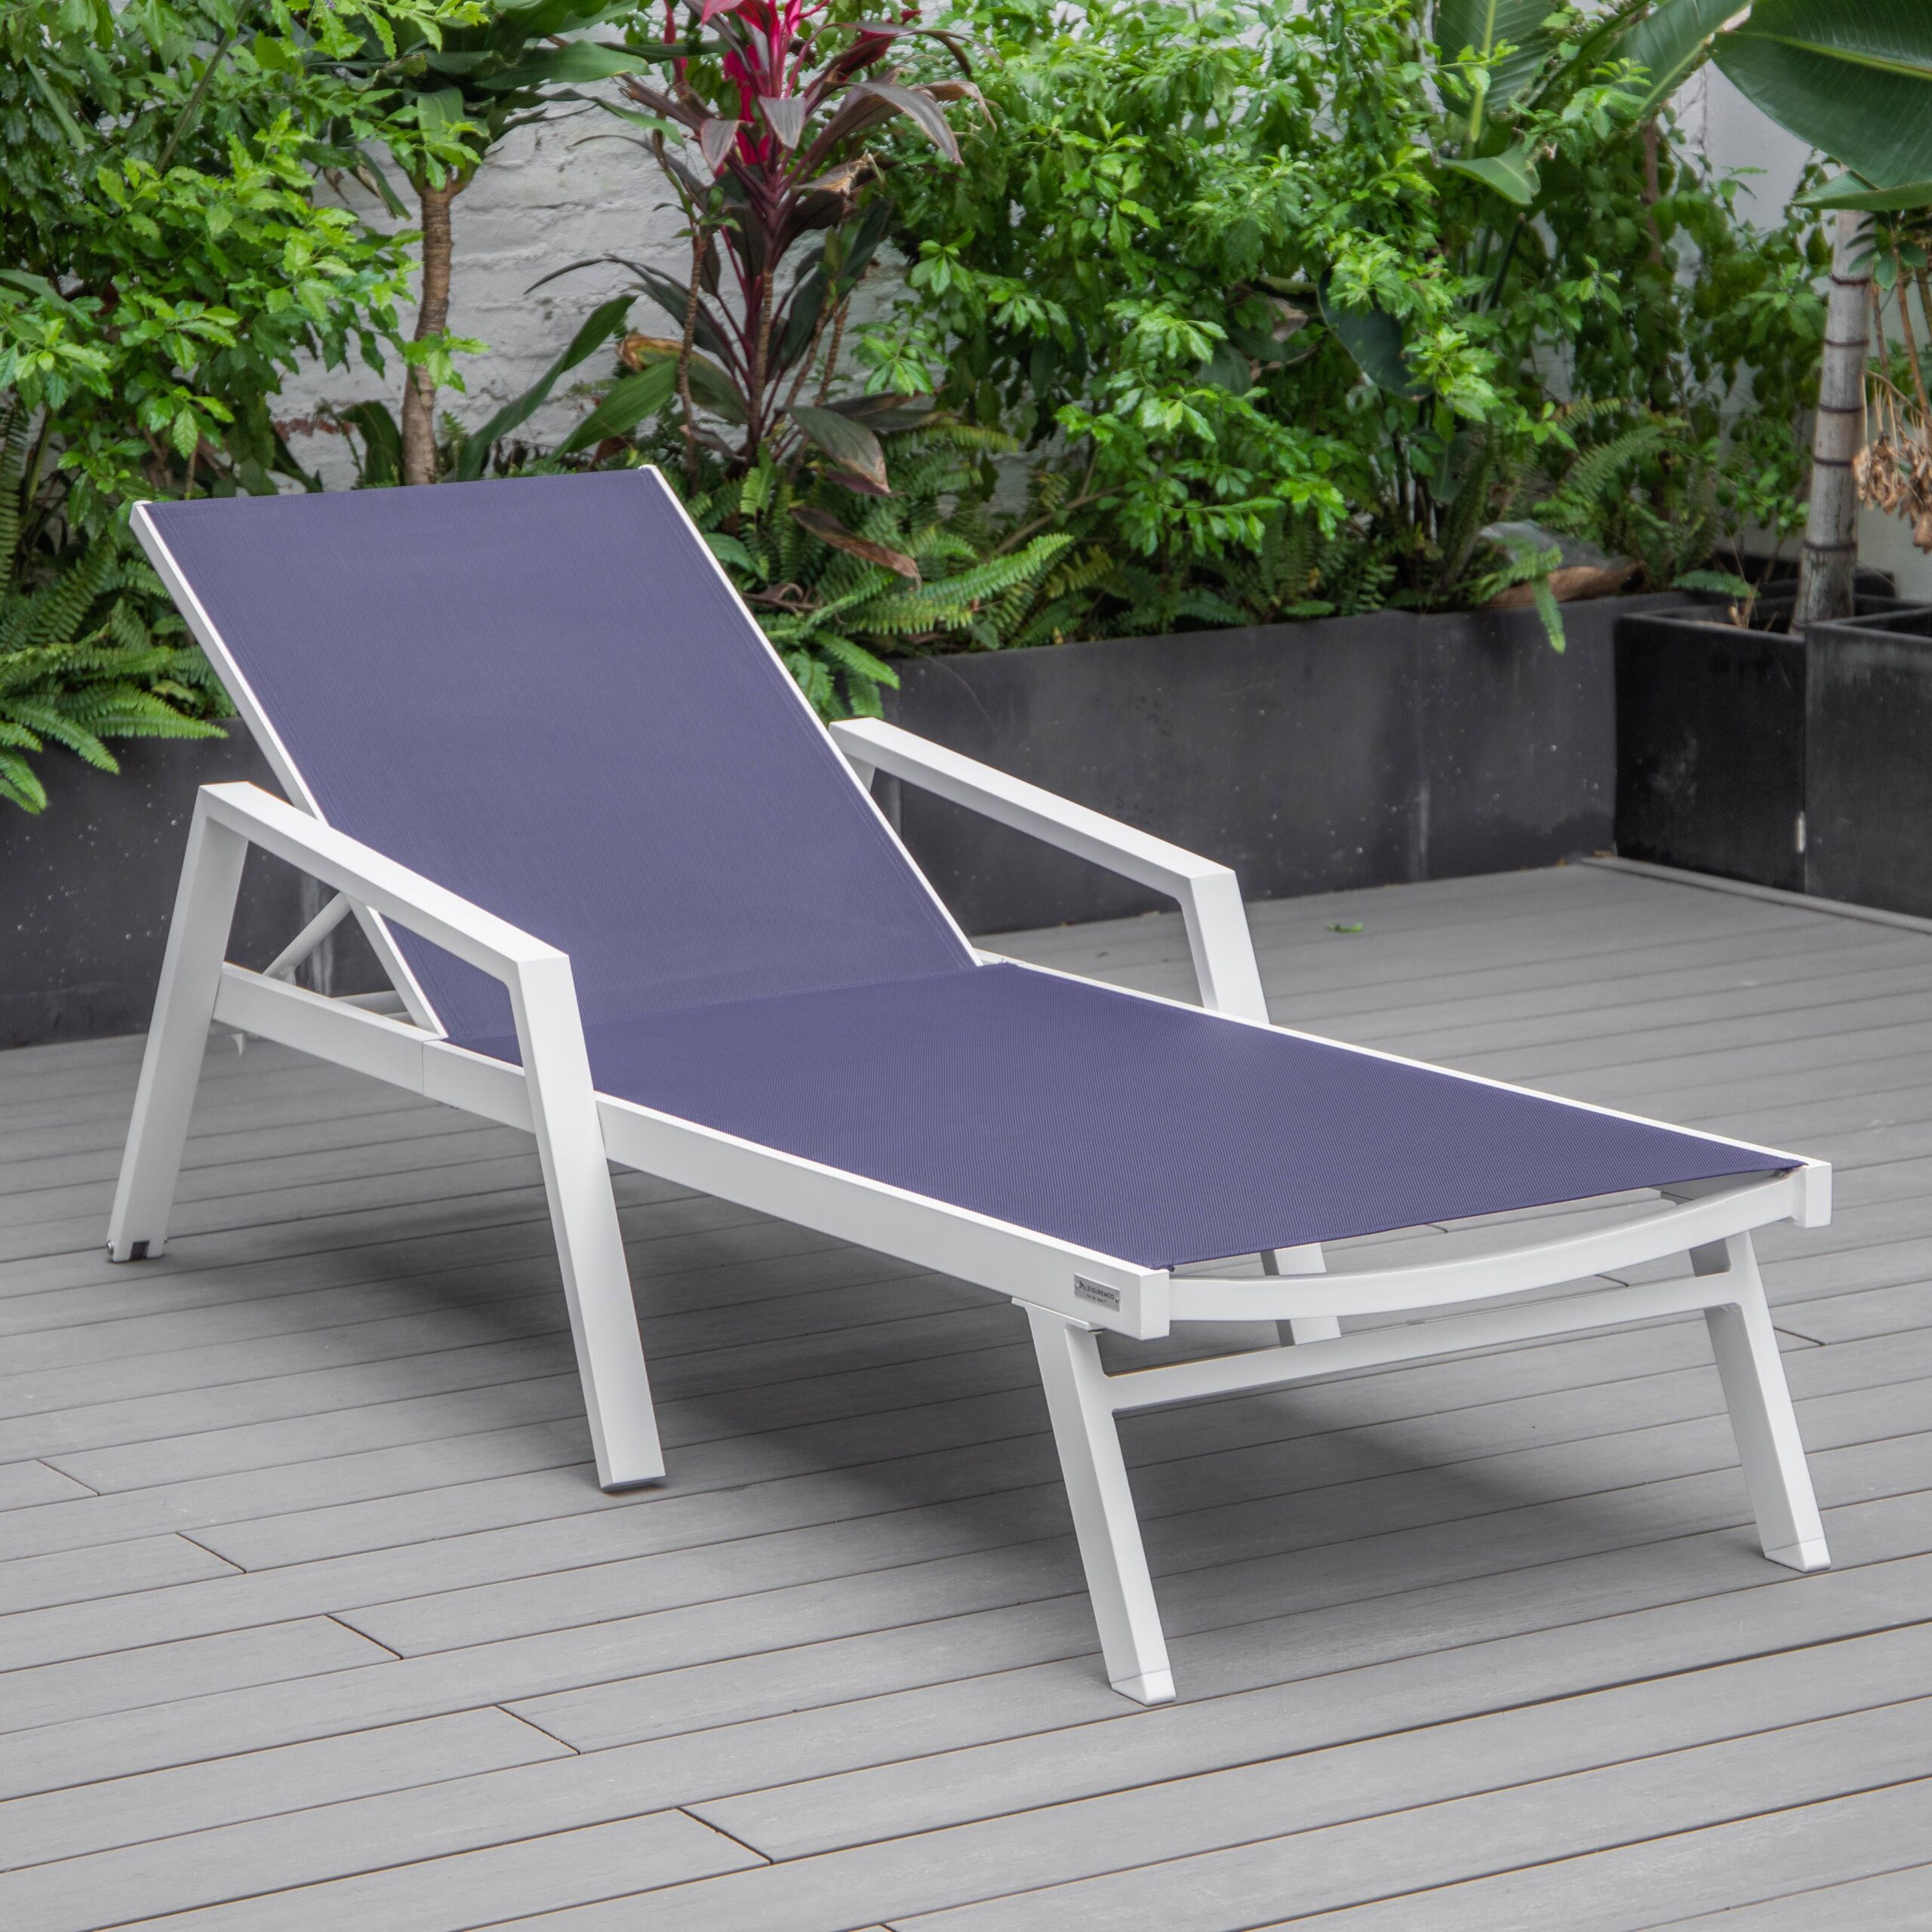 LeisureMod Marlin Patio Chaise Lounge Chair with Armrests Poolside Outdoor Chaise Lounge Chair for Patio Lawn & Garden Modern White Aluminum Suntan Chair with Sling Chaise Lounge Chair (Navy Blue) - image 2 of 12